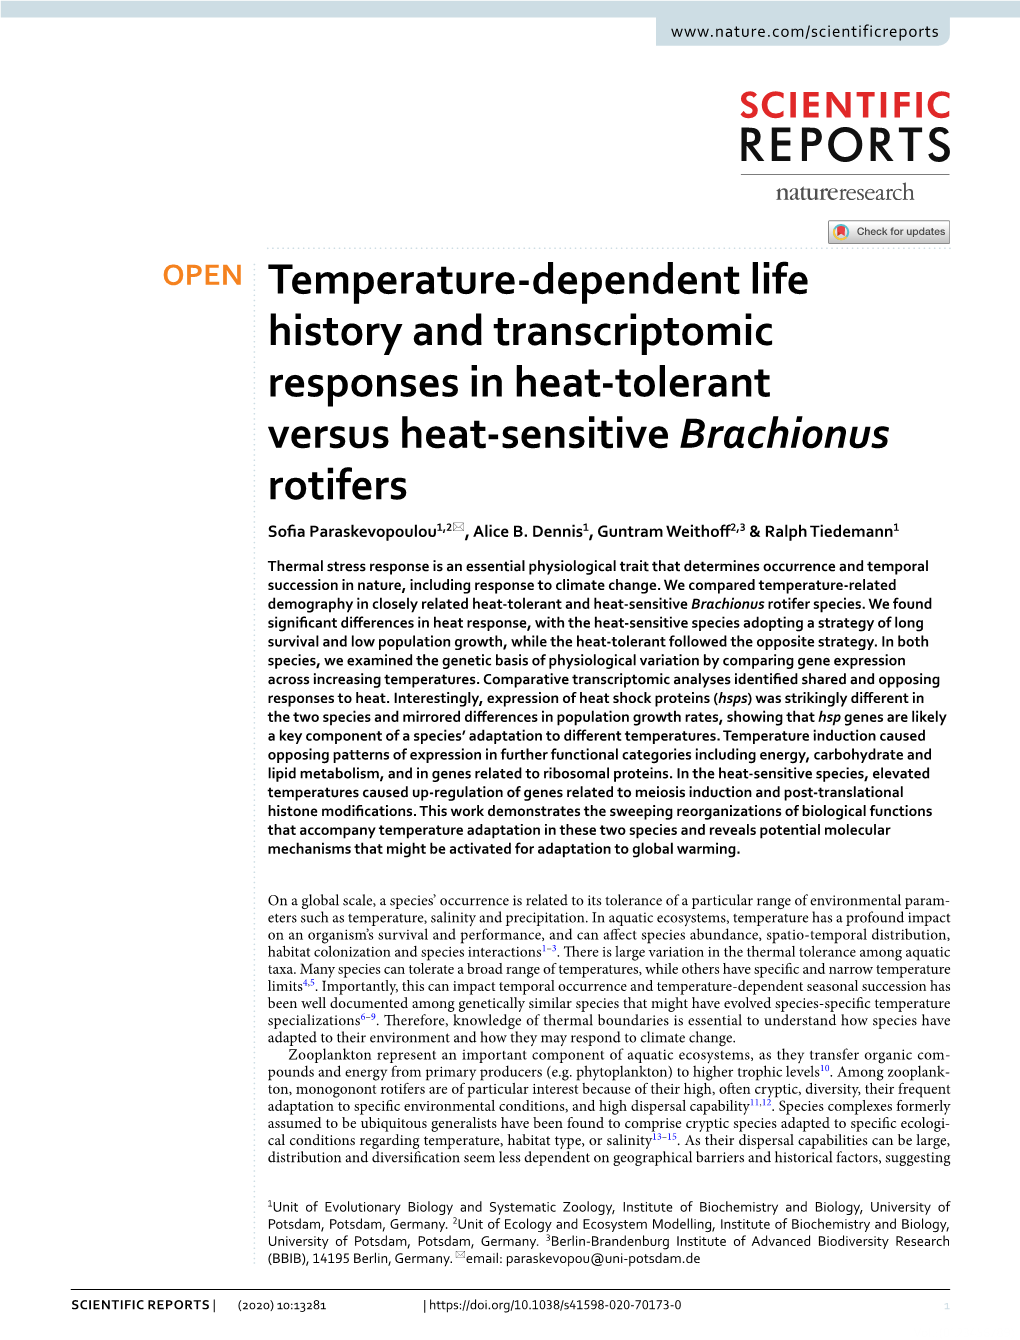 Temperature-Dependent Life History and Transcriptomic Responses In